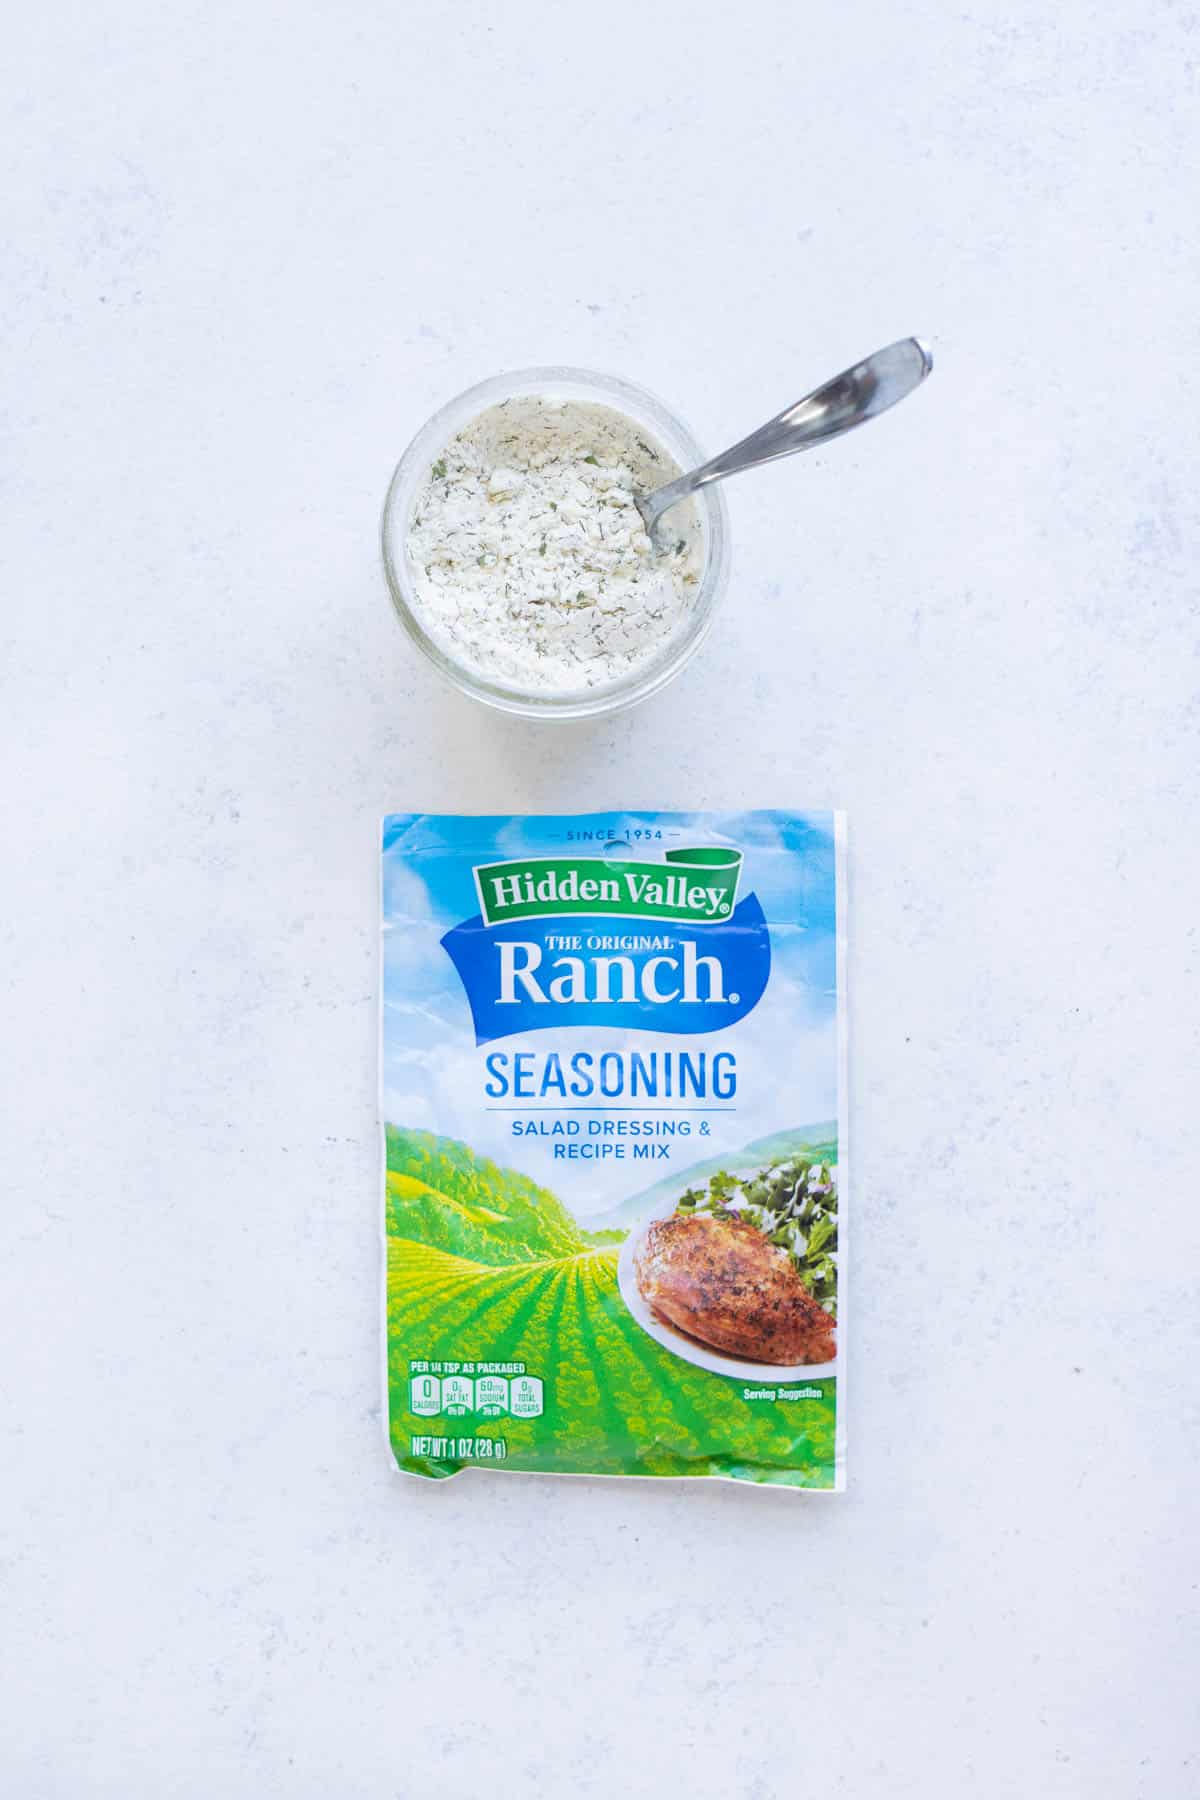 You can either buy or make your own ranch seasoning.